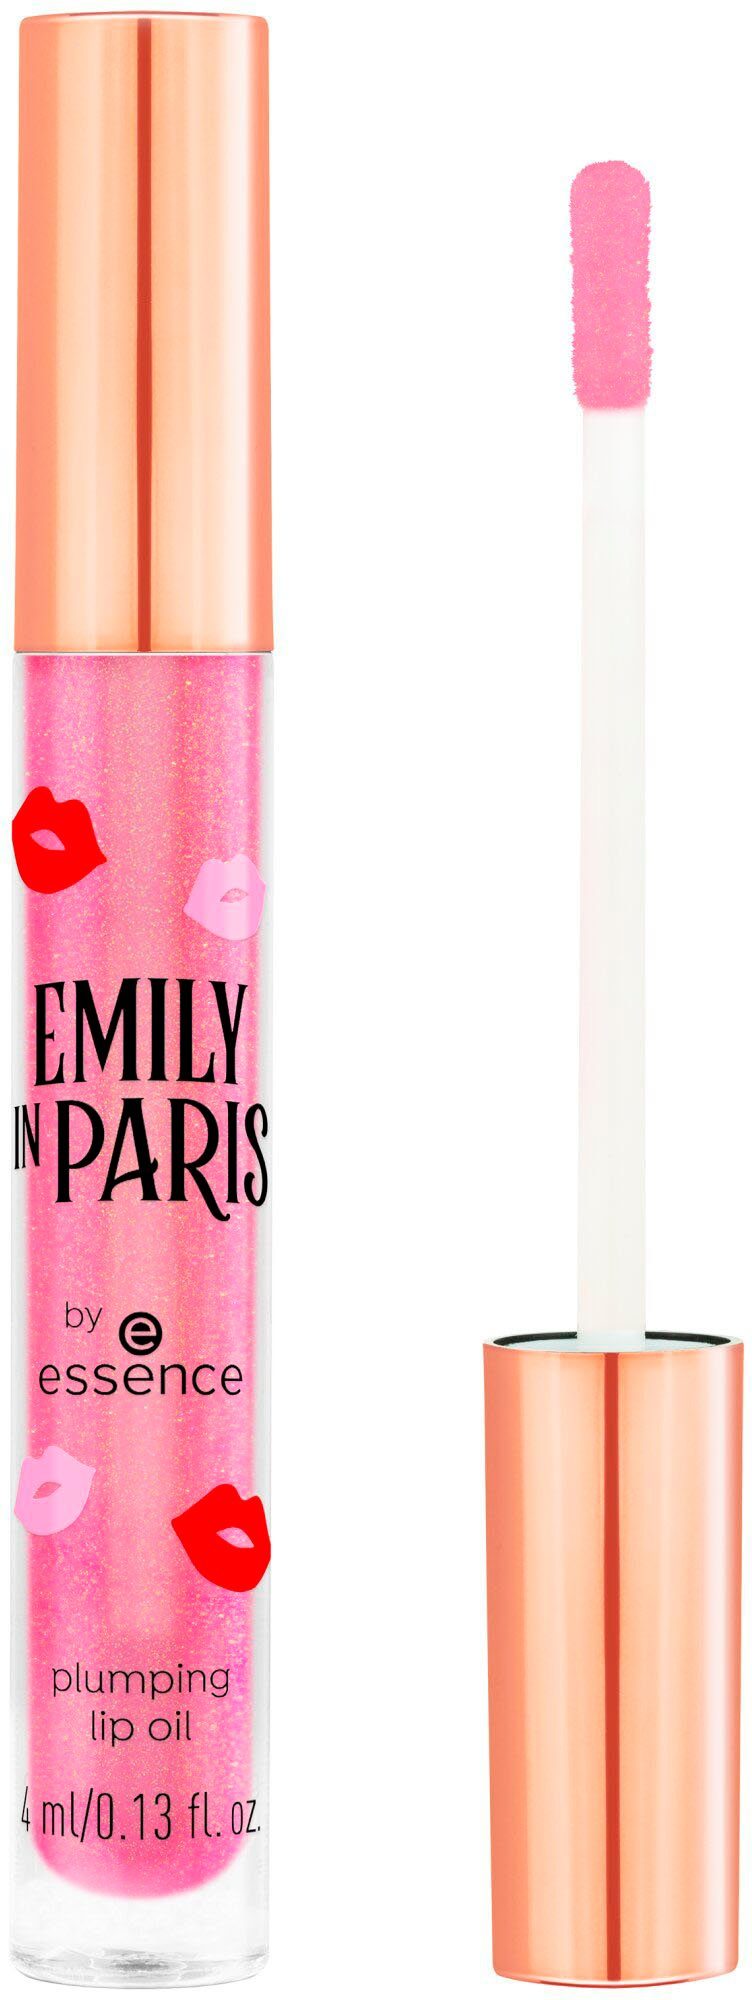 oil EMILY Lipgloss by PARIS essence IN lip plumping Essence